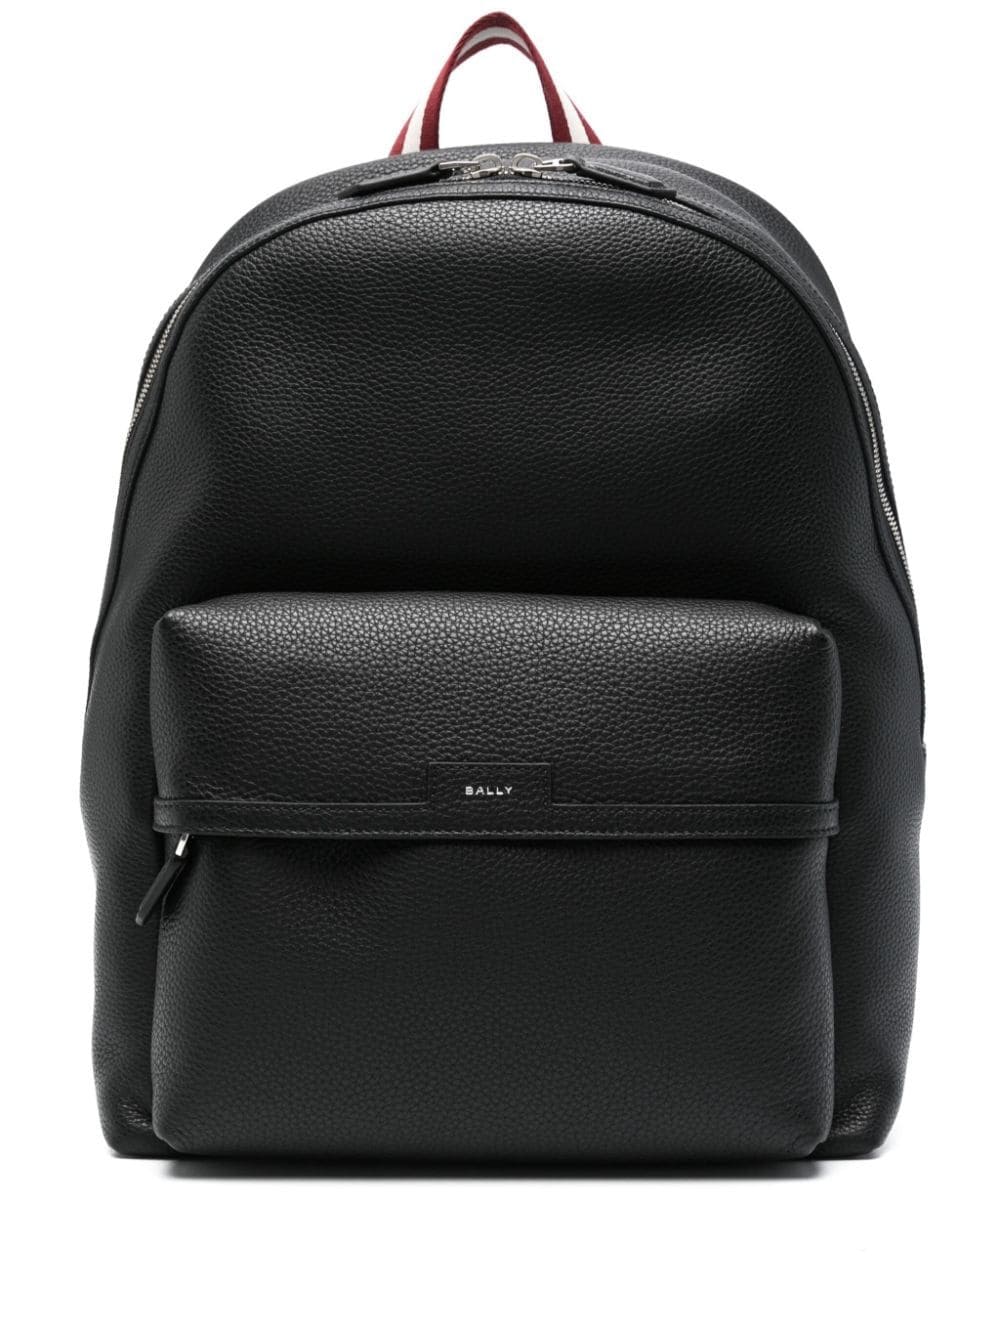 Bally Code leather backpack - Black von Bally